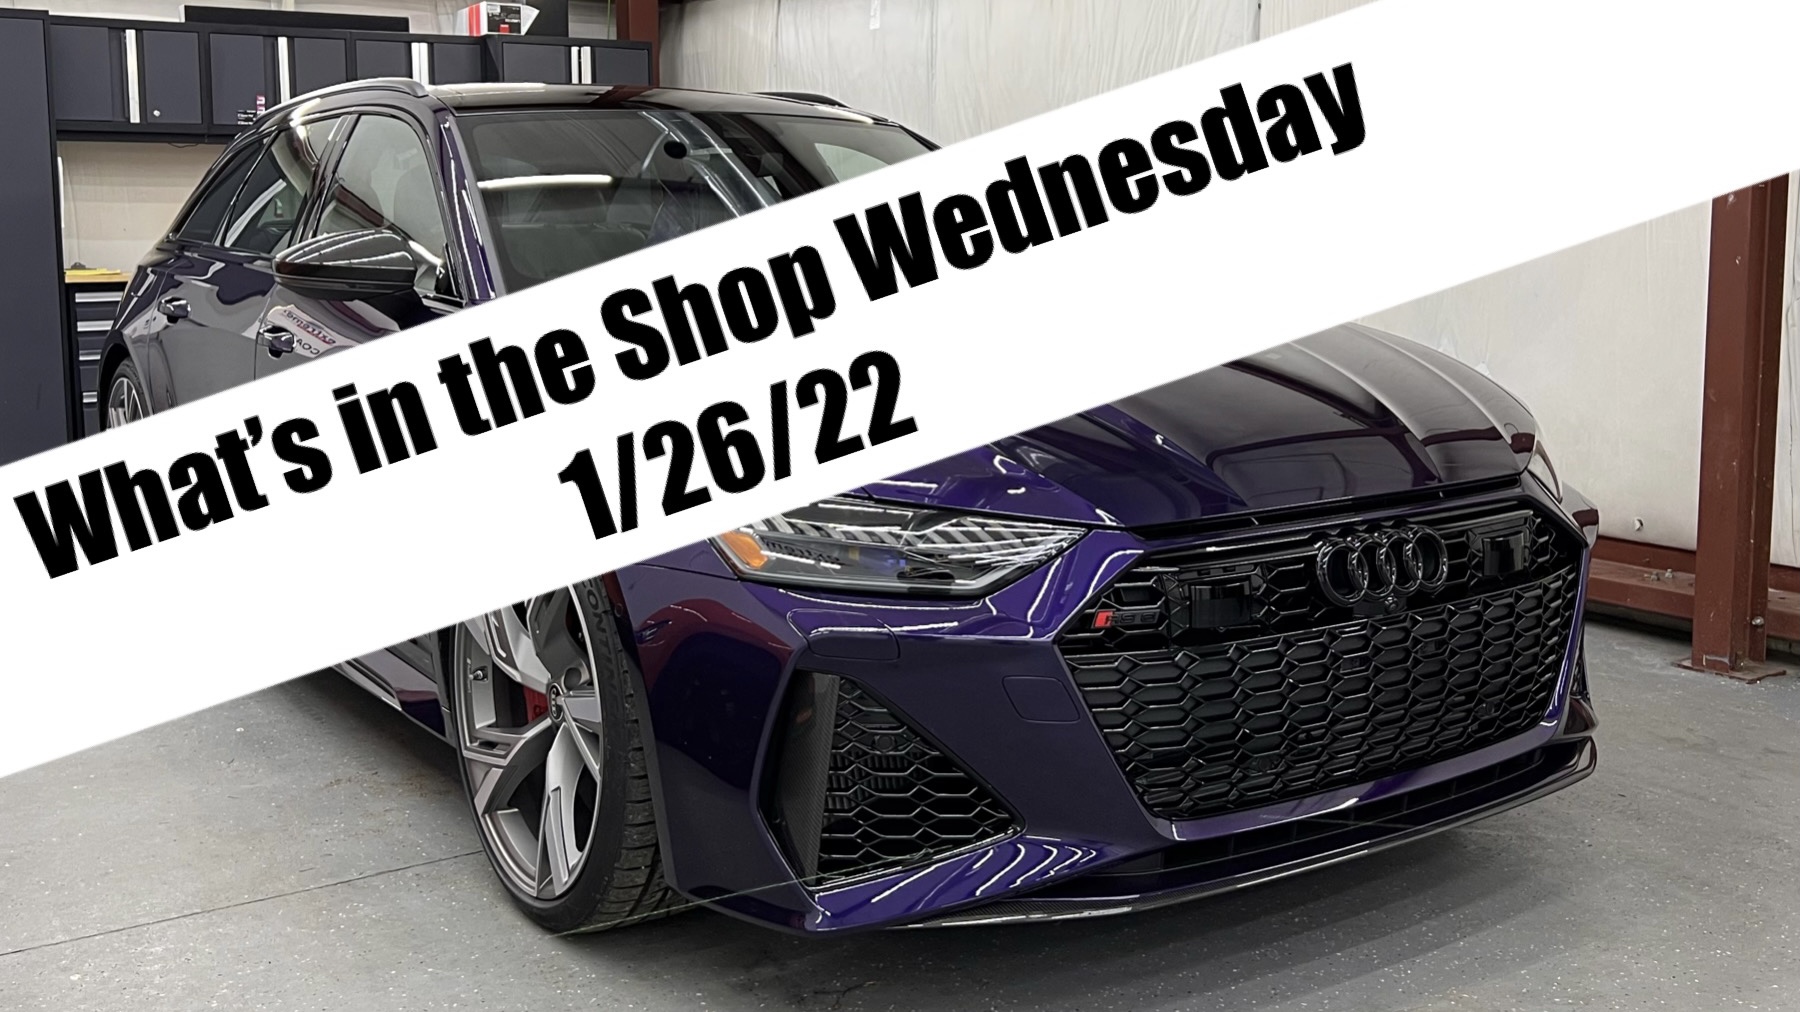 What’s in the Shop Wednesday 1/26/22